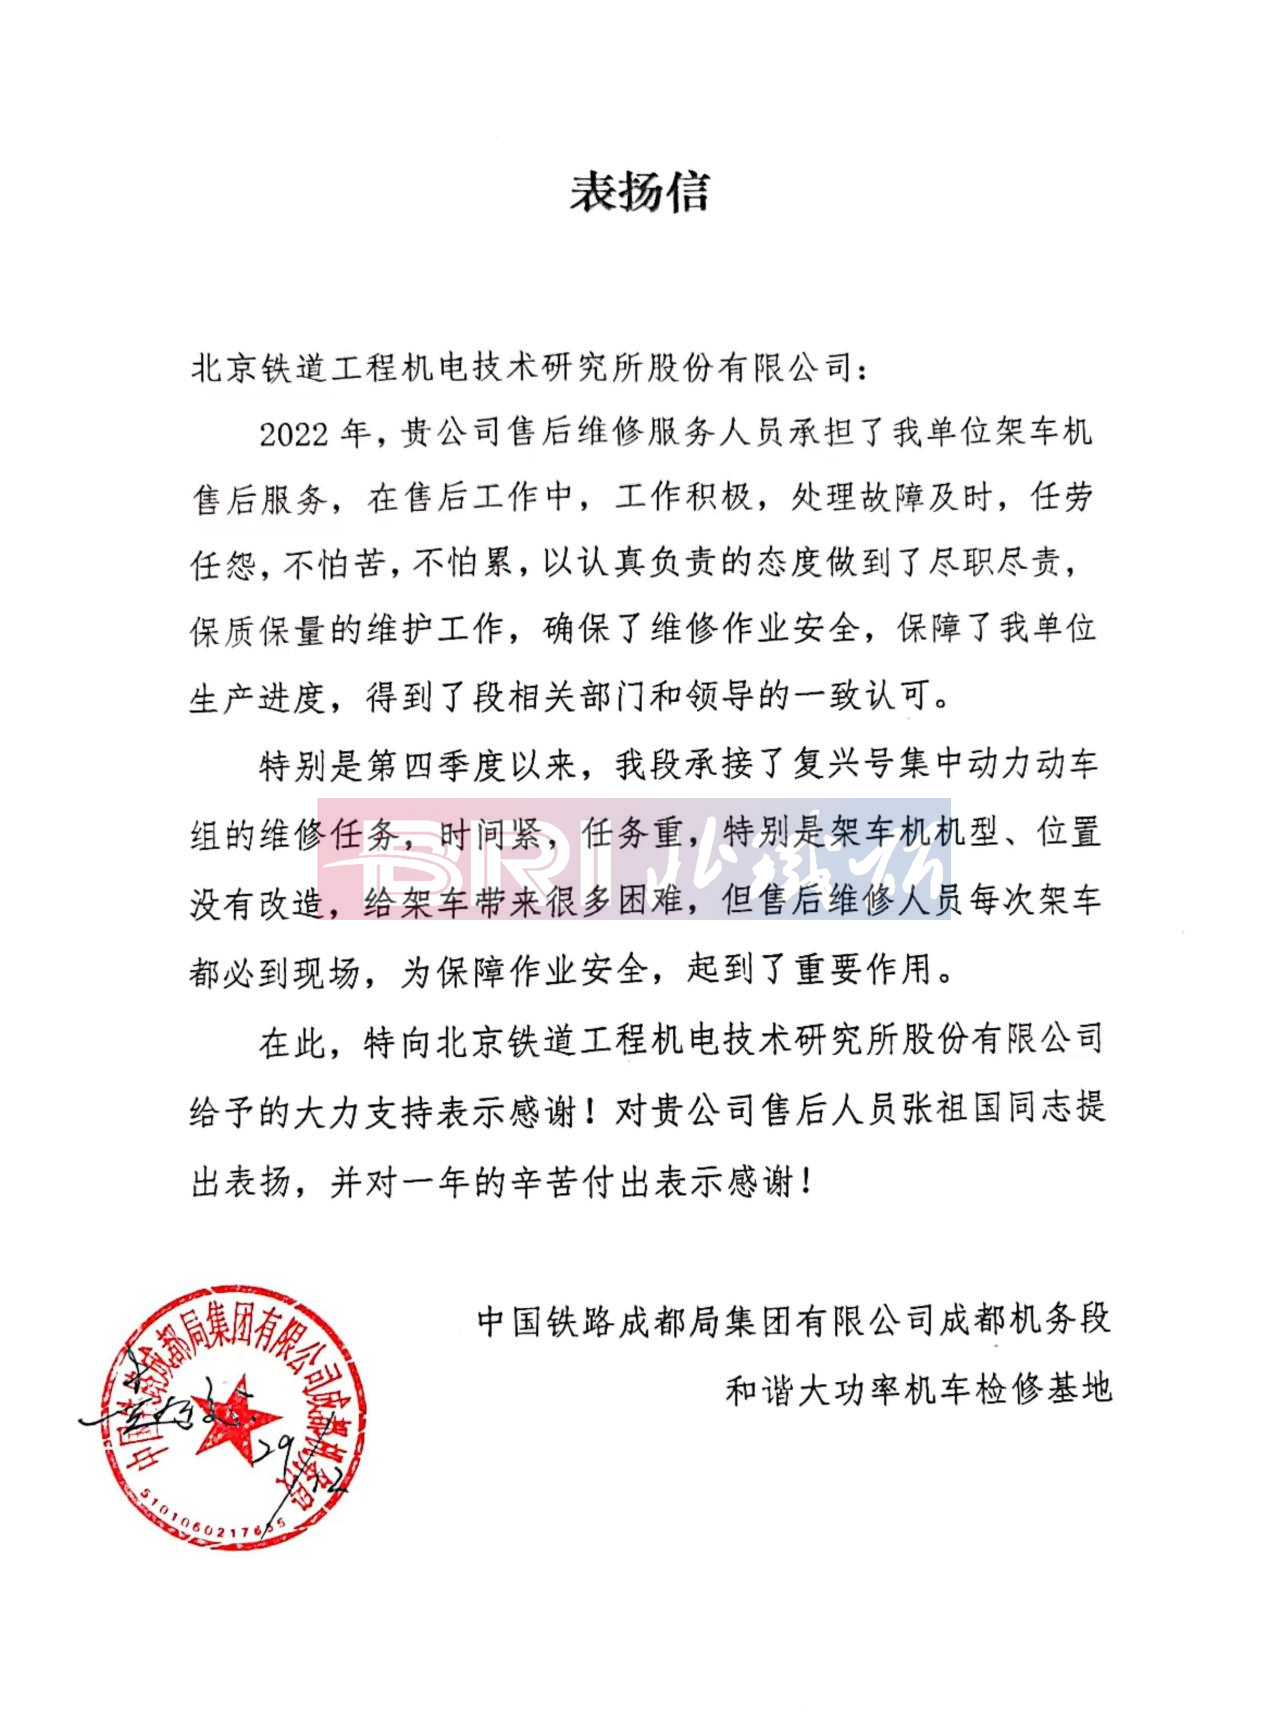 The commendation letter from Harmonious High Power Locomotive Maintenance Base